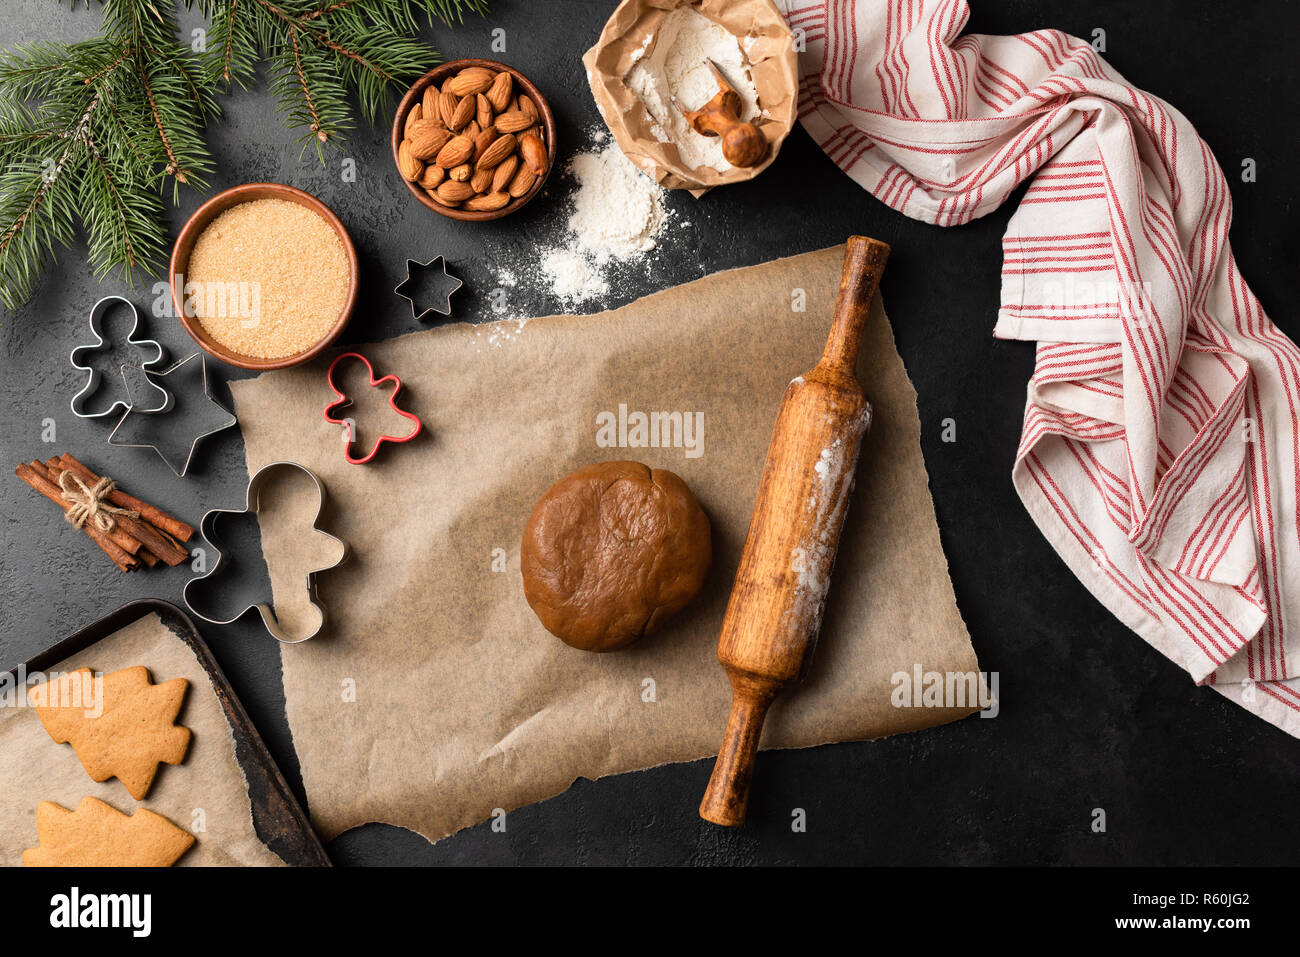 Gingerbread cookie baking. Christmas Holiday Baking on black concrete background. Top view Stock Photo